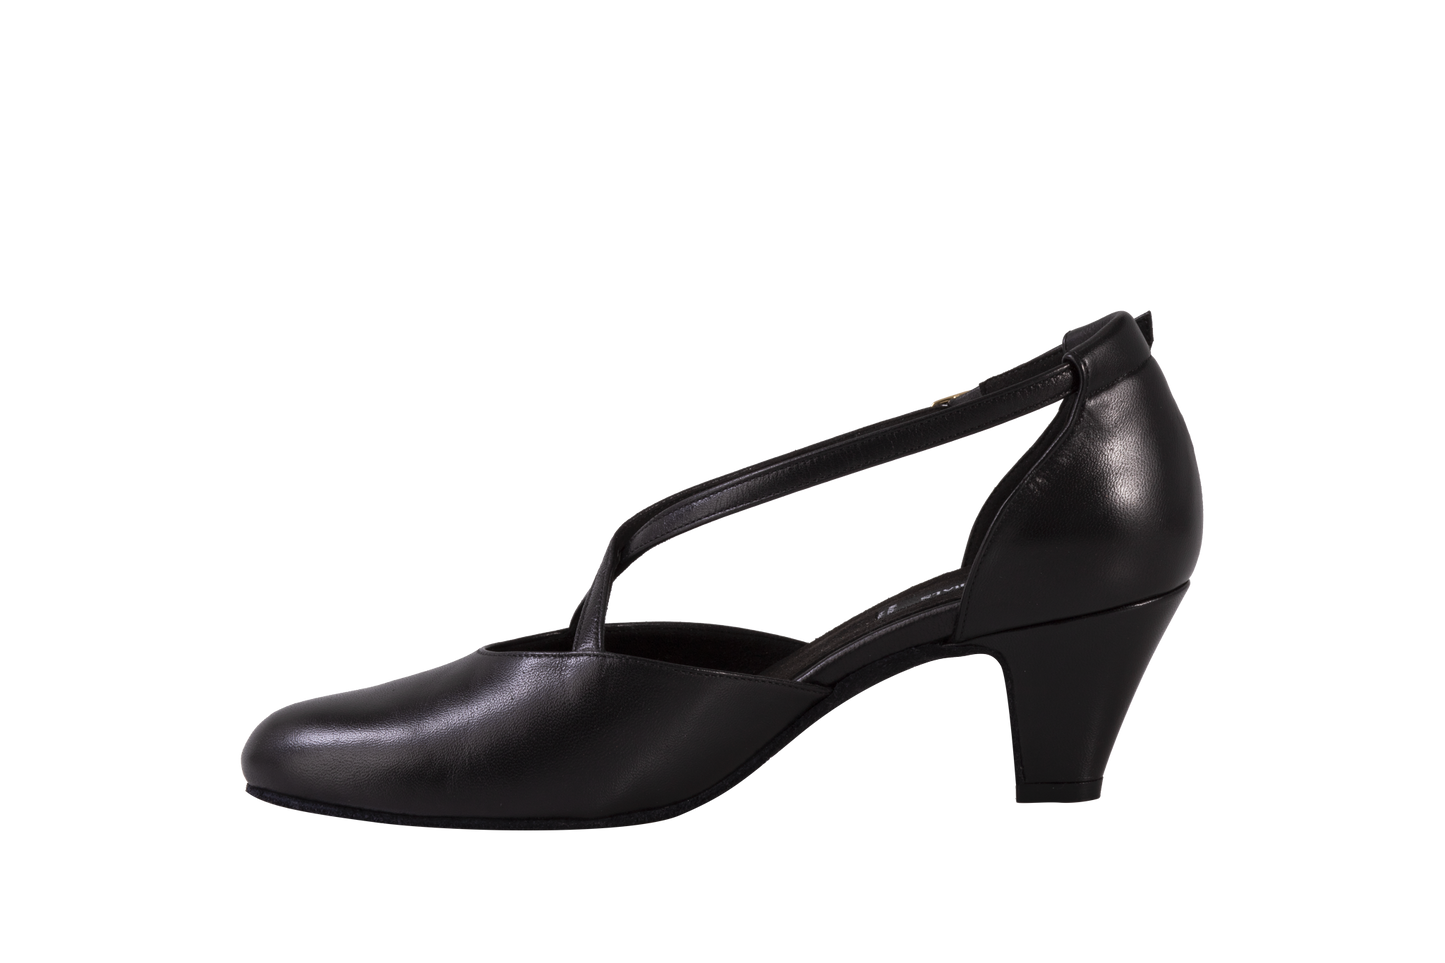 Dance Naturals 725 Cuccarini Black Leather Round Toe Smooth Ballroom Shoe with Criss-Cross Strap